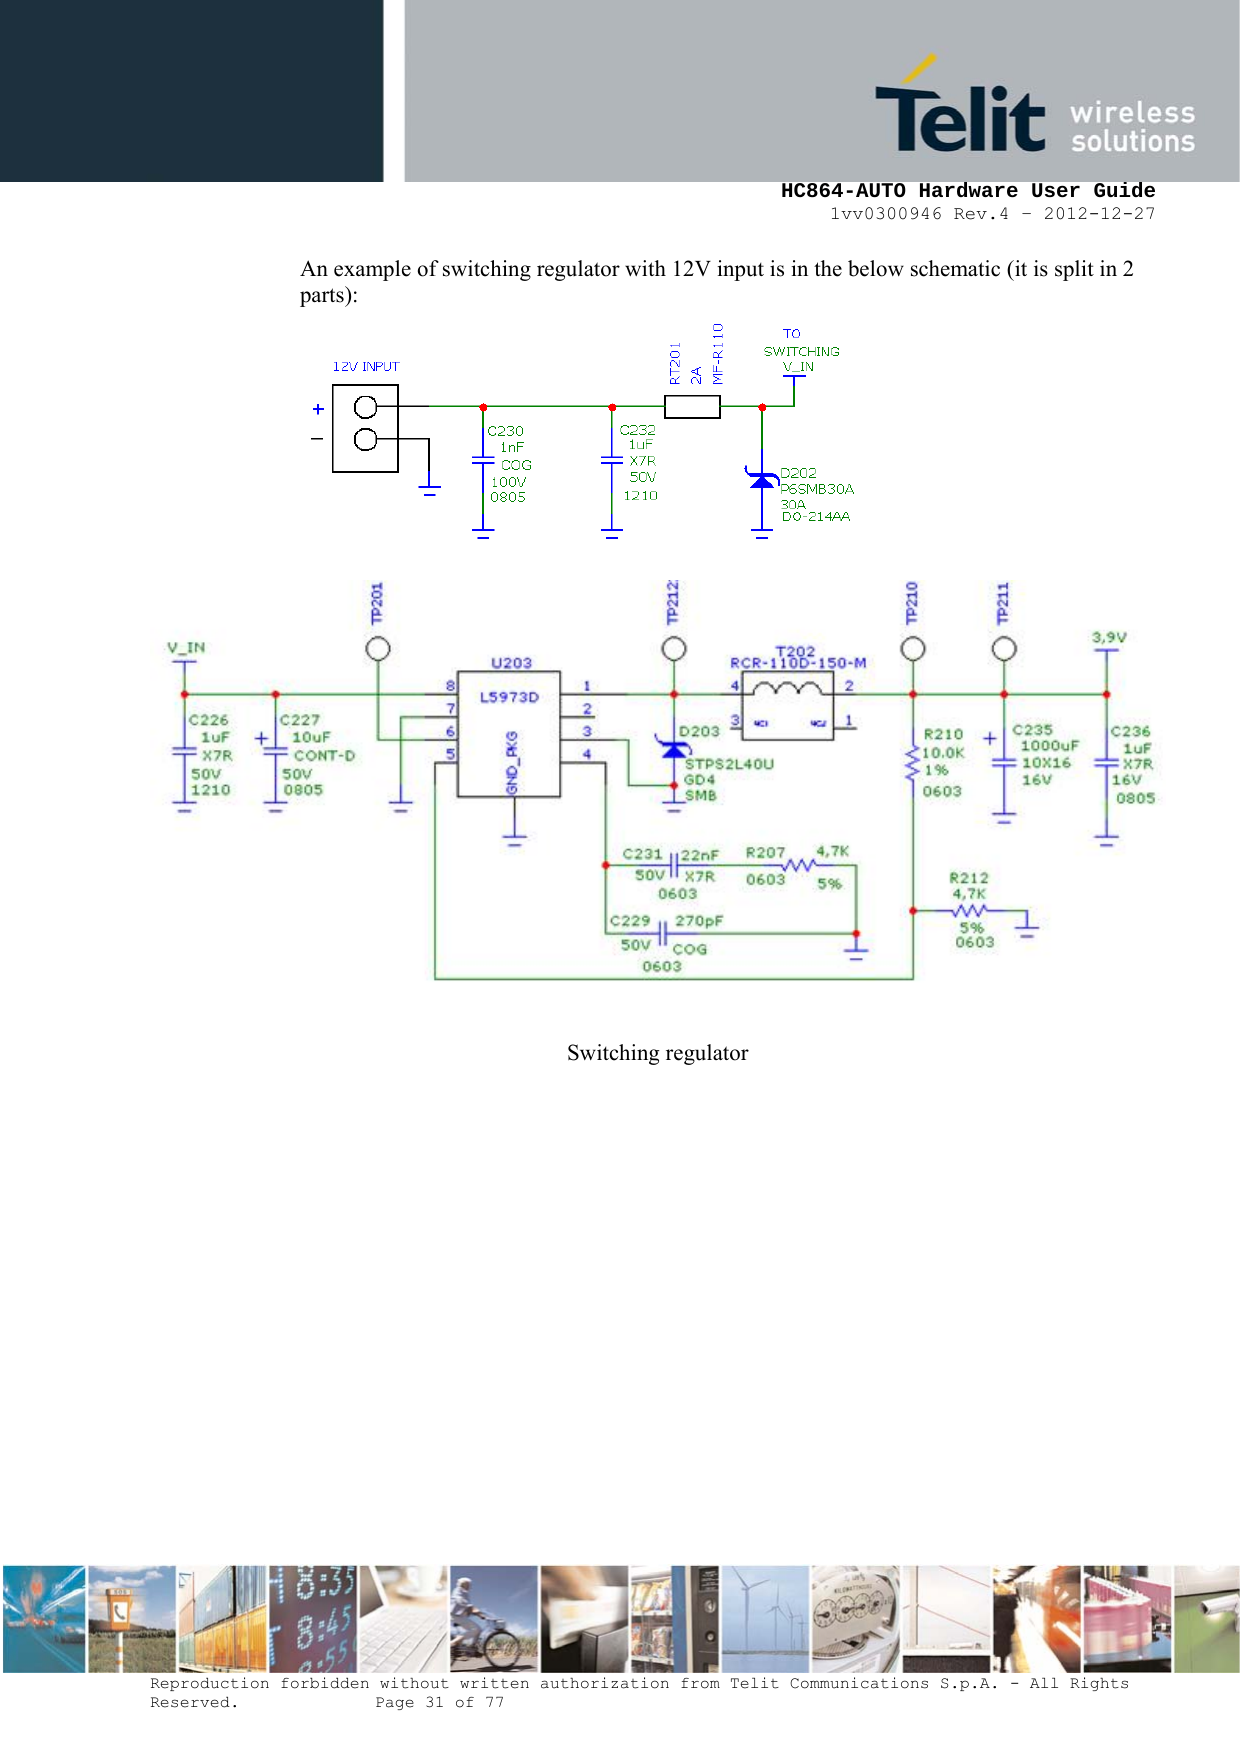     HC864-AUTO Hardware User Guide 1vv0300946 Rev.4 – 2012-12-27 Reproduction forbidden without written authorization from Telit Communications S.p.A. - All Rights Reserved.    Page 31 of 77  An example of switching regulator with 12V input is in the below schematic (it is split in 2 parts):  Switching regulator